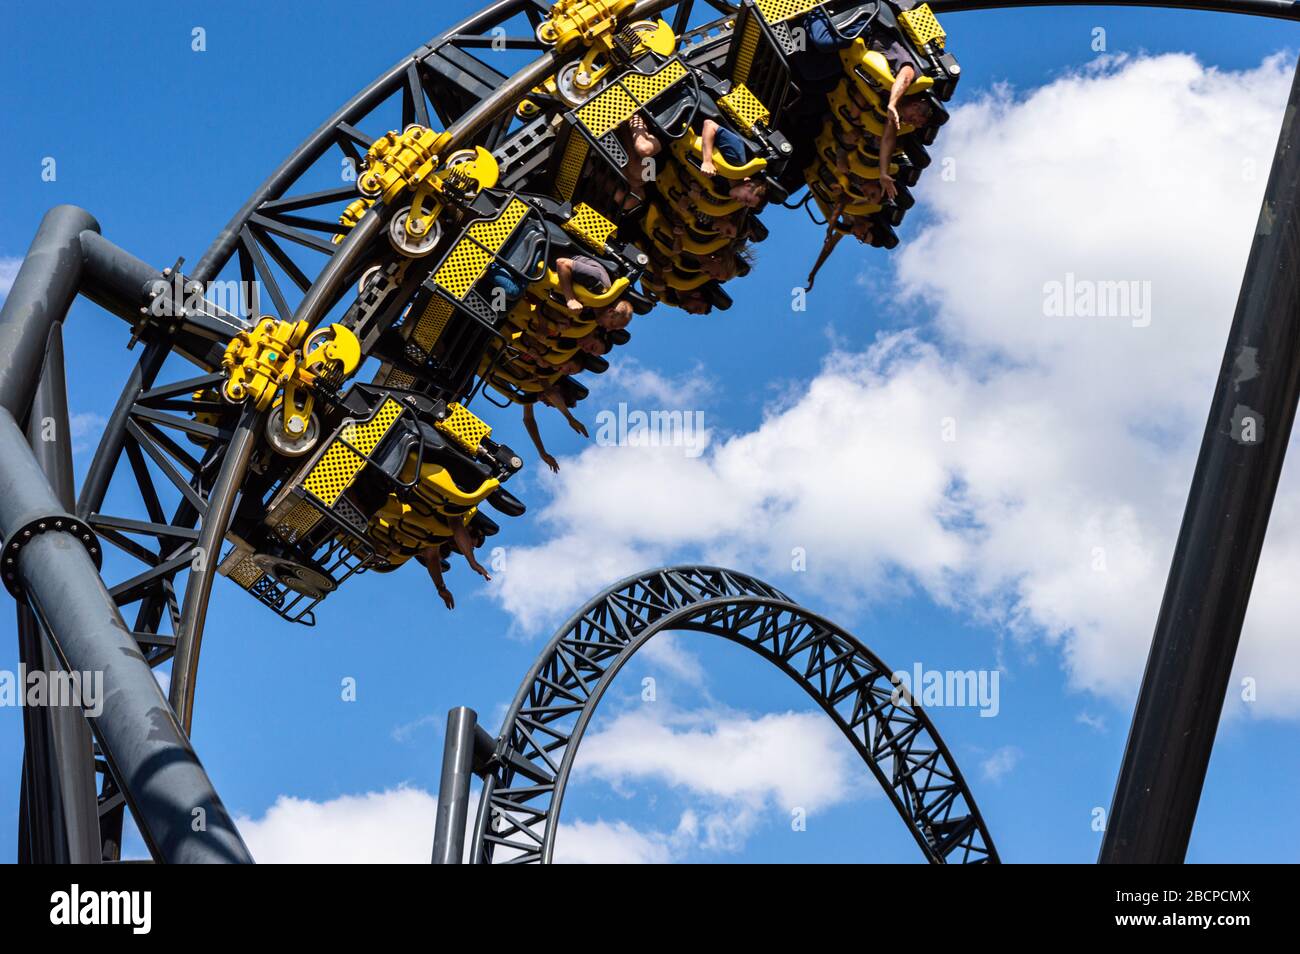 The Smiler at Alton Towers Theme park, UK. Yellow cars fly round the track which has world record 14 inversions. 3 minutes long with a vertical lift Stock Photo